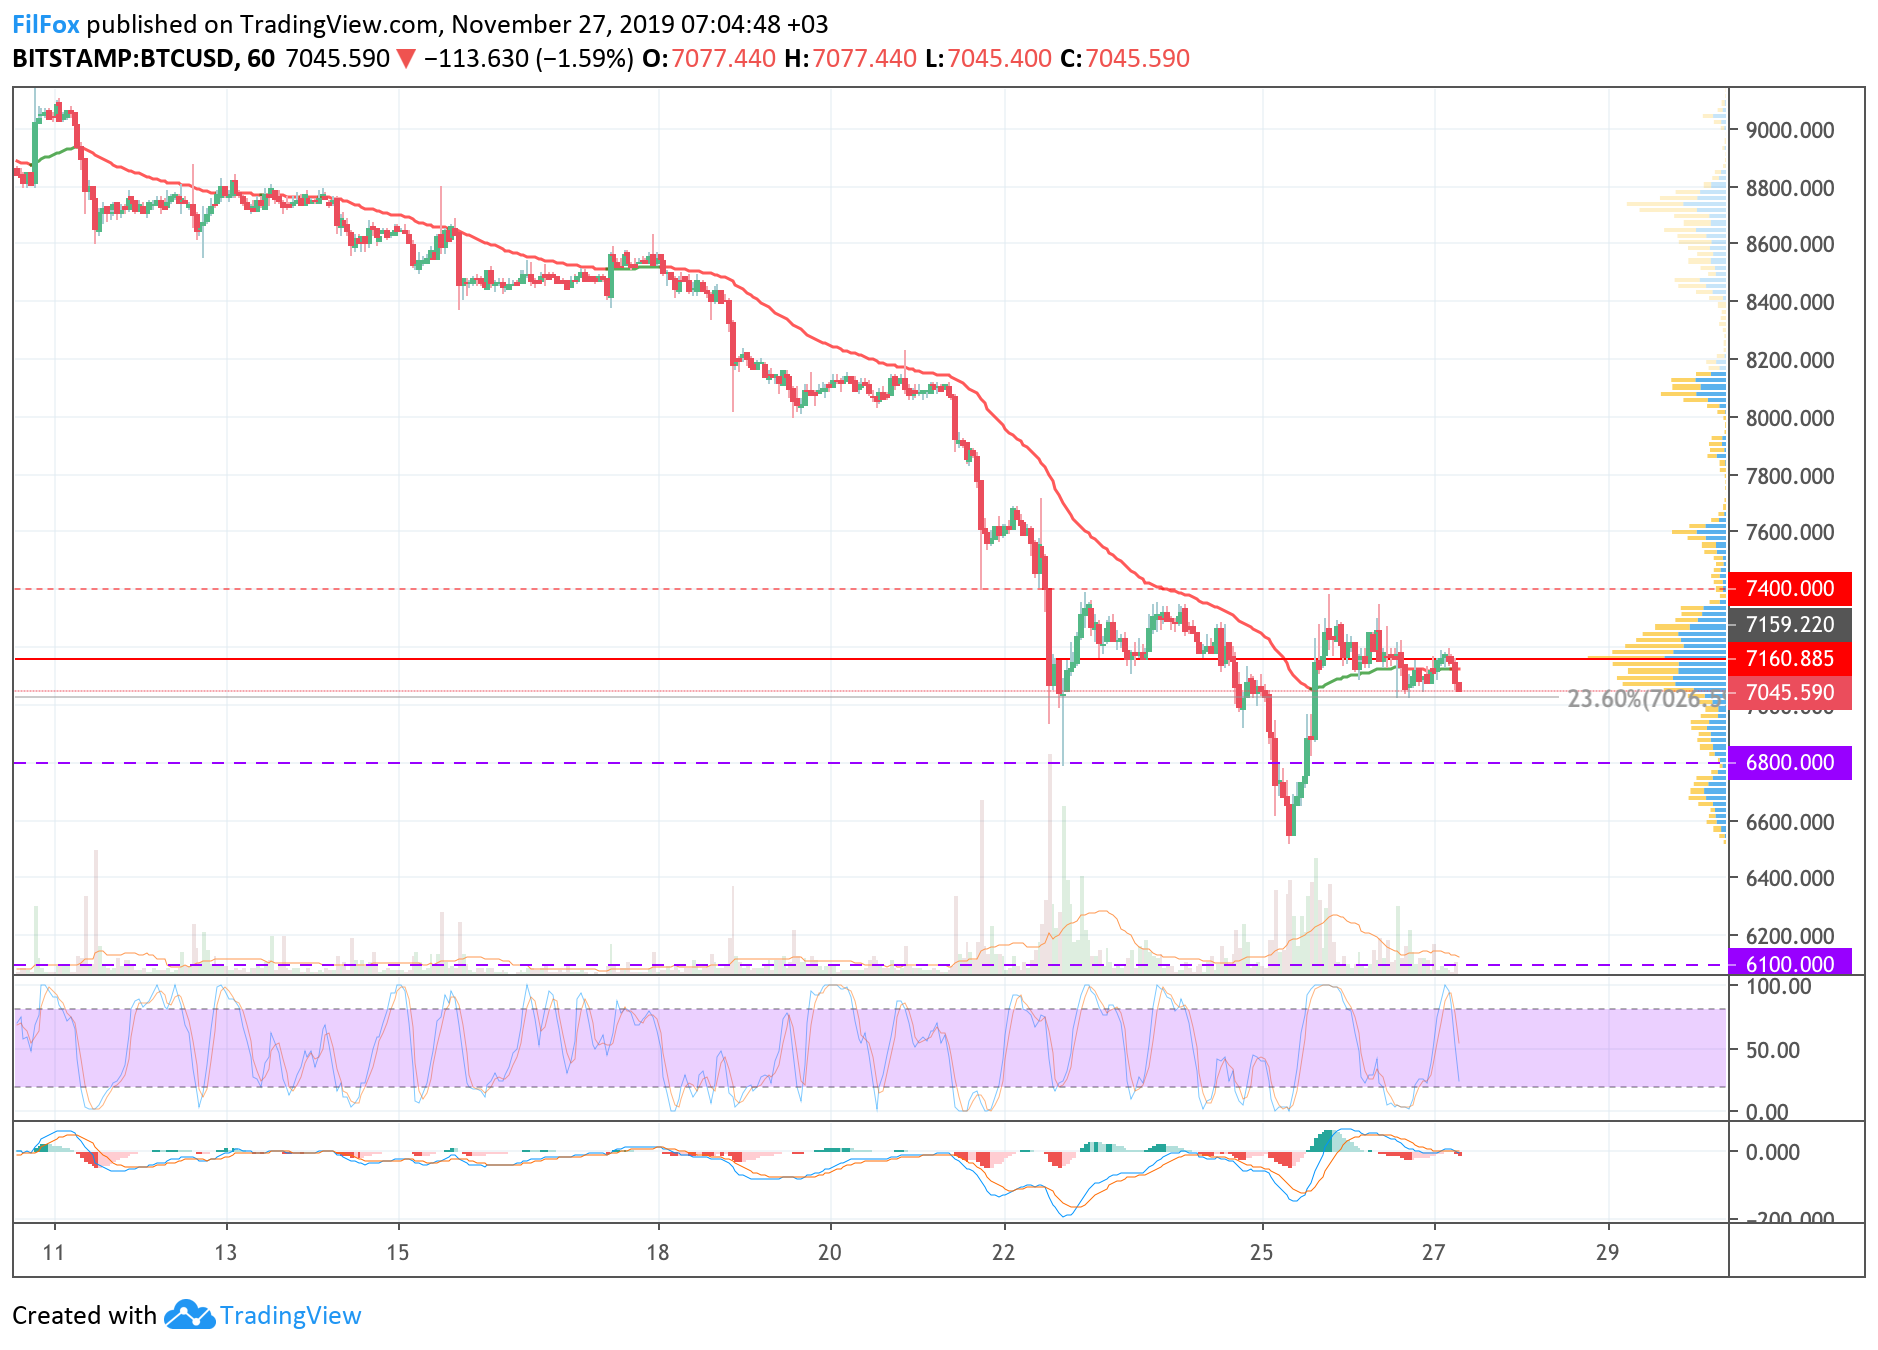 Analysis of cryptocurrency pairs BTC / USD, ETH / USD and XRP / USD on 11/27/2019